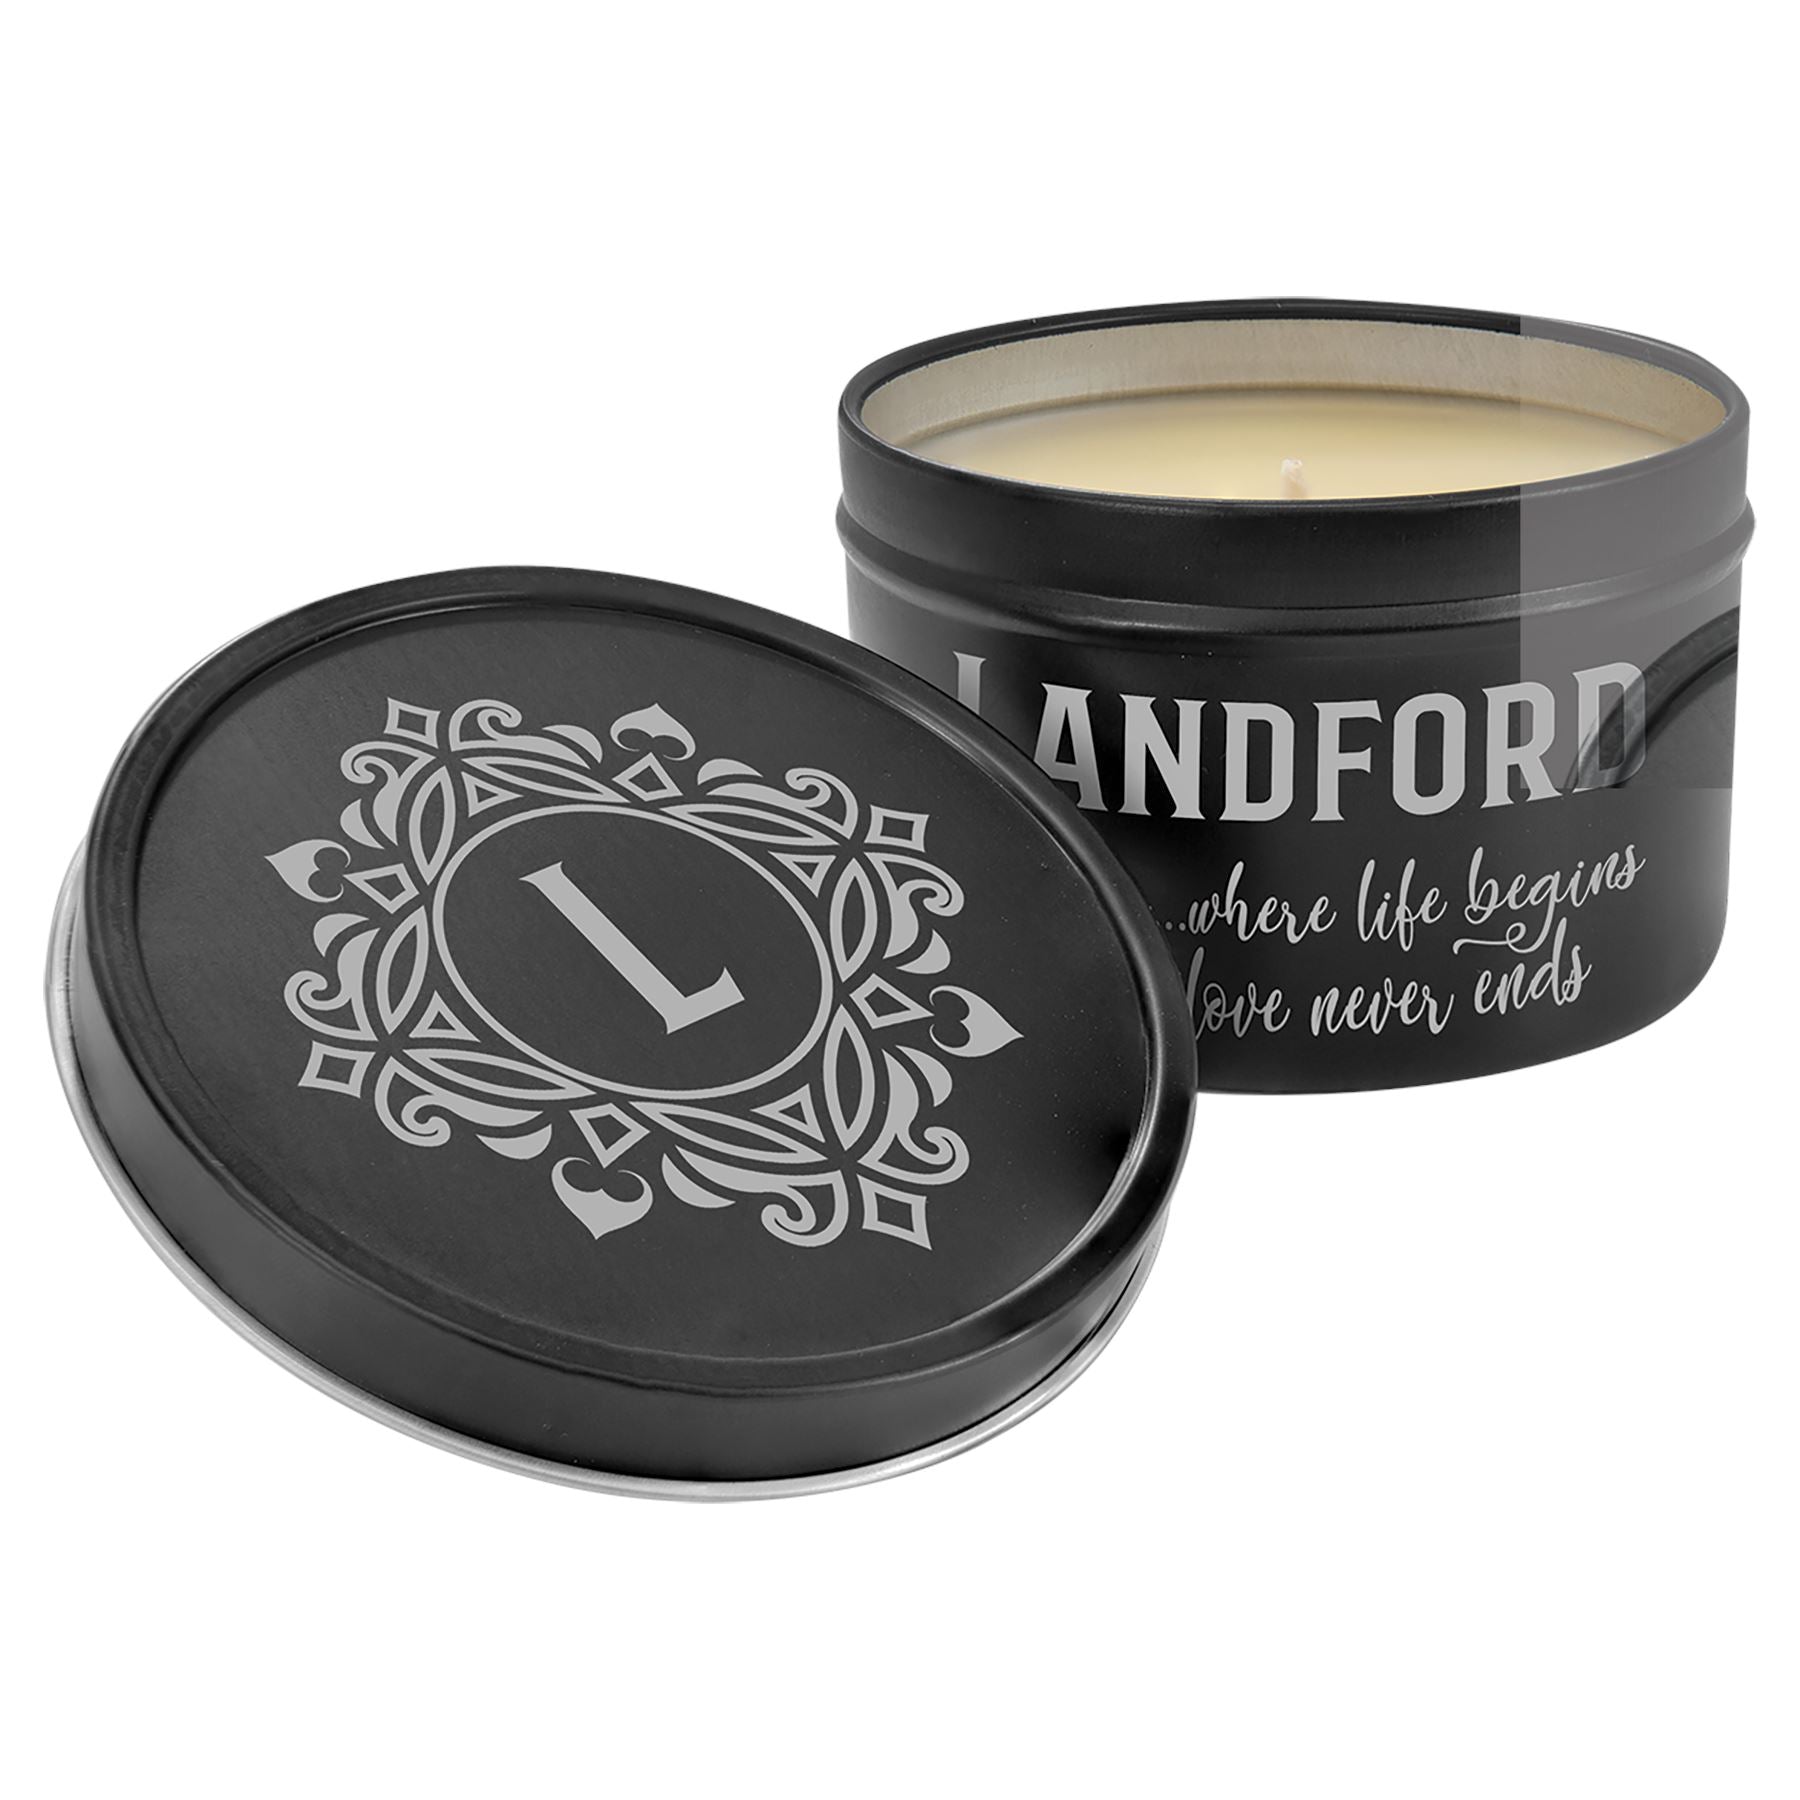 Scented Candle in a Black Metal Tin, 8oz, Laser Engraved Scented Candle Craftworks NW 